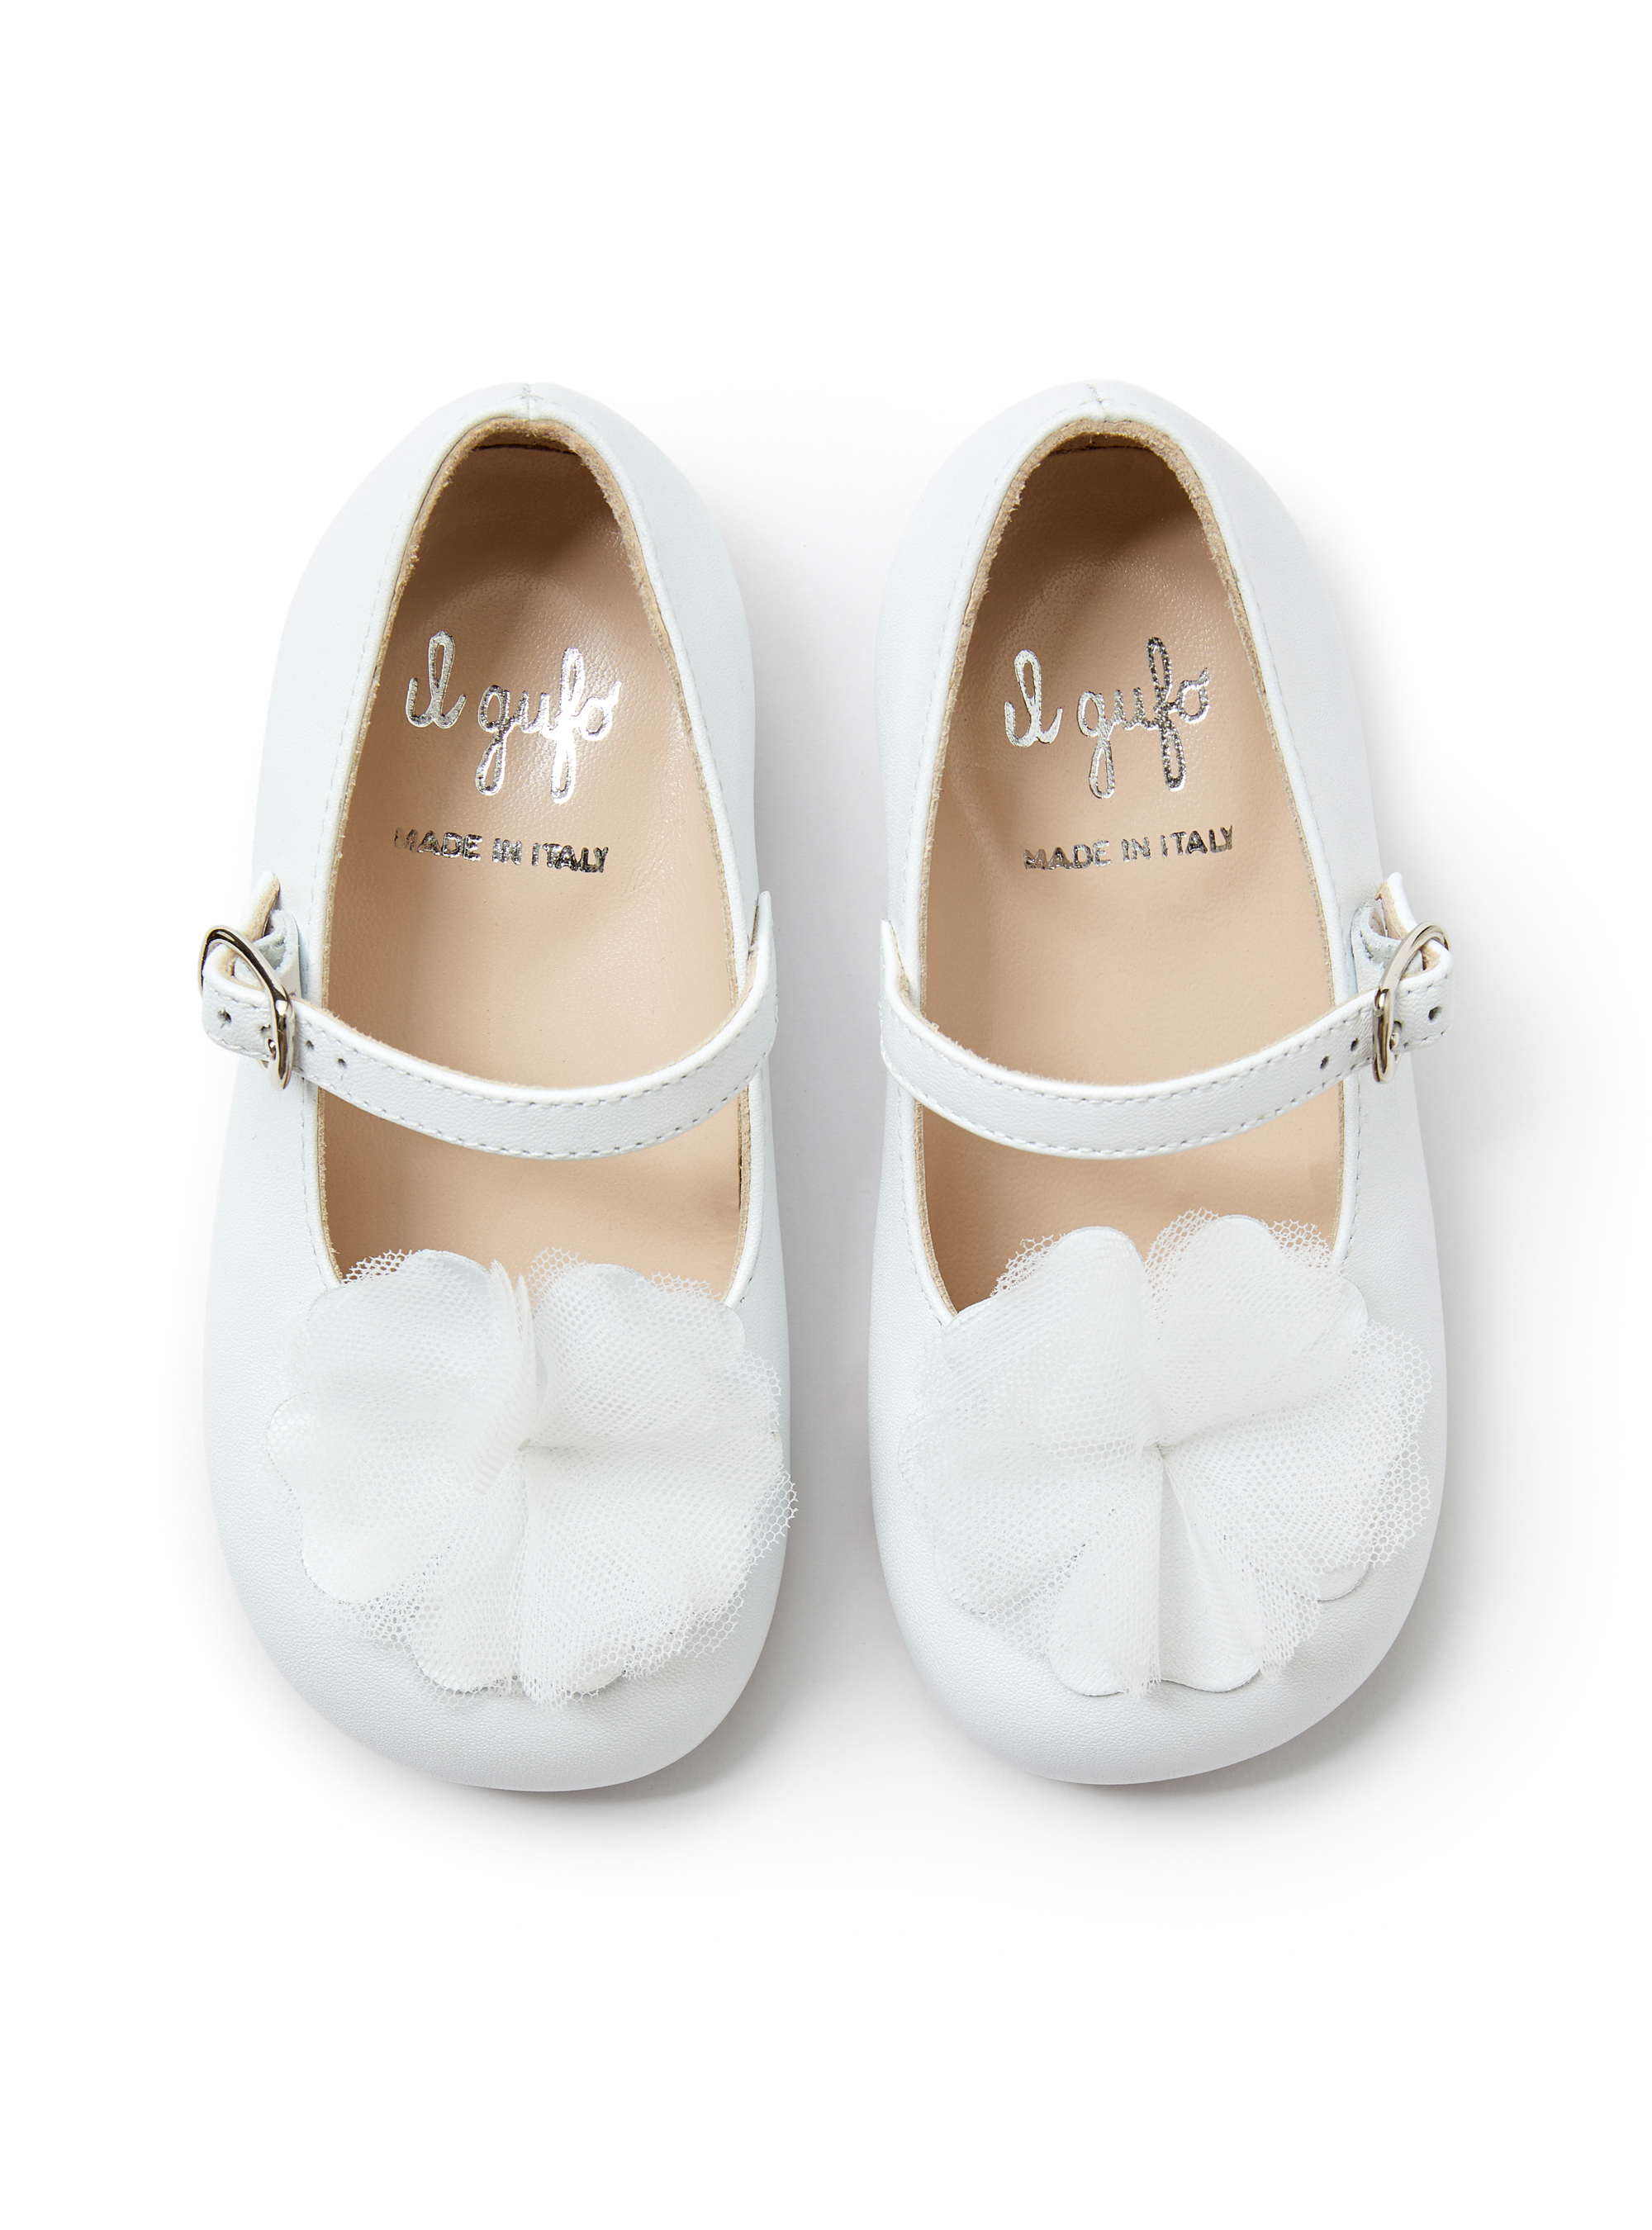 Chaussures plates blanches avec tulle - Blanc | Il Gufo